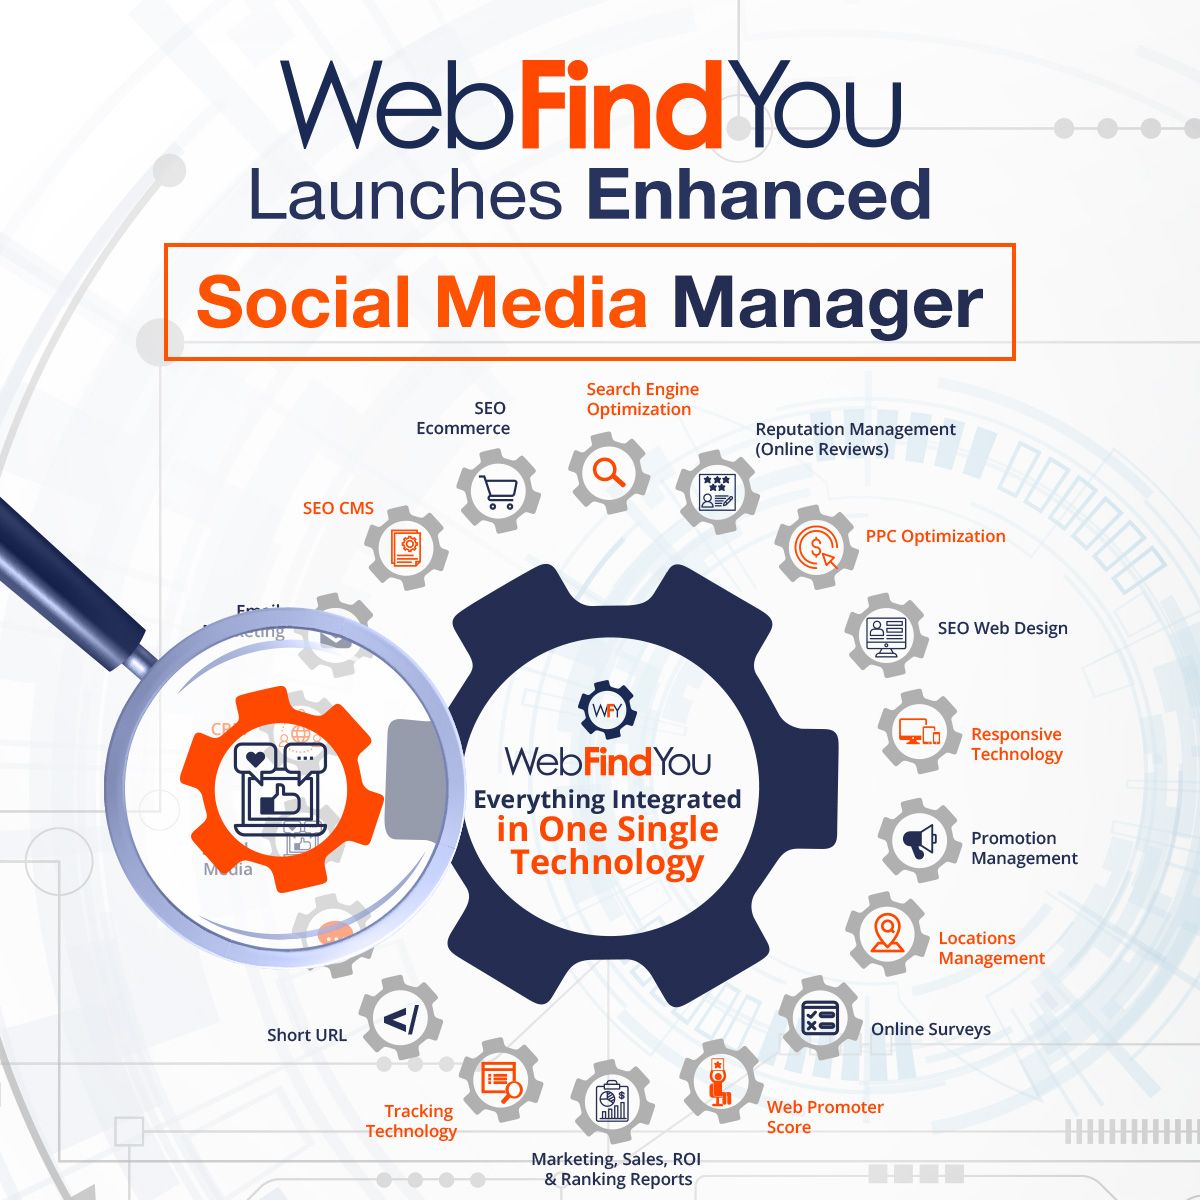 WebFindYou Launches Enhanced Social Media Manager